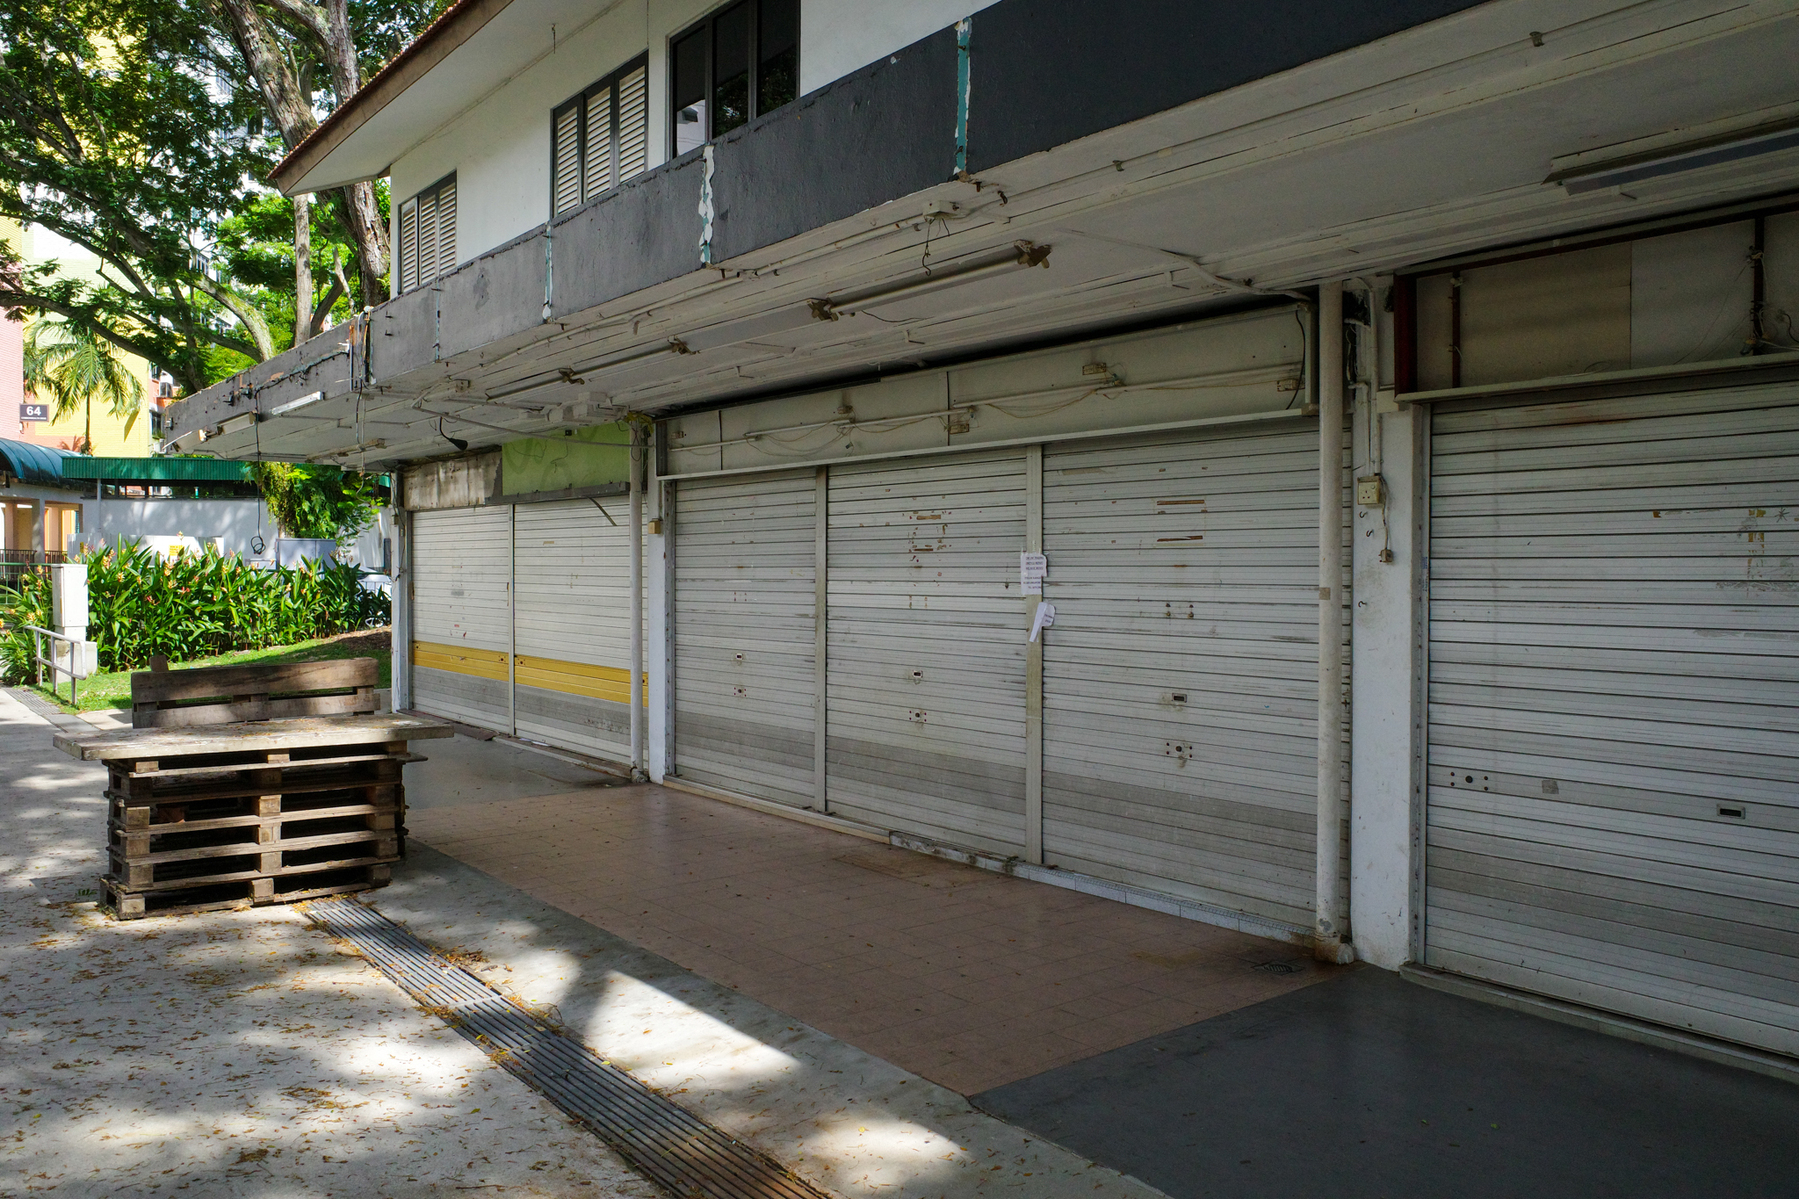 a color photograph of shuttered shops on the ground floor of a deserted building